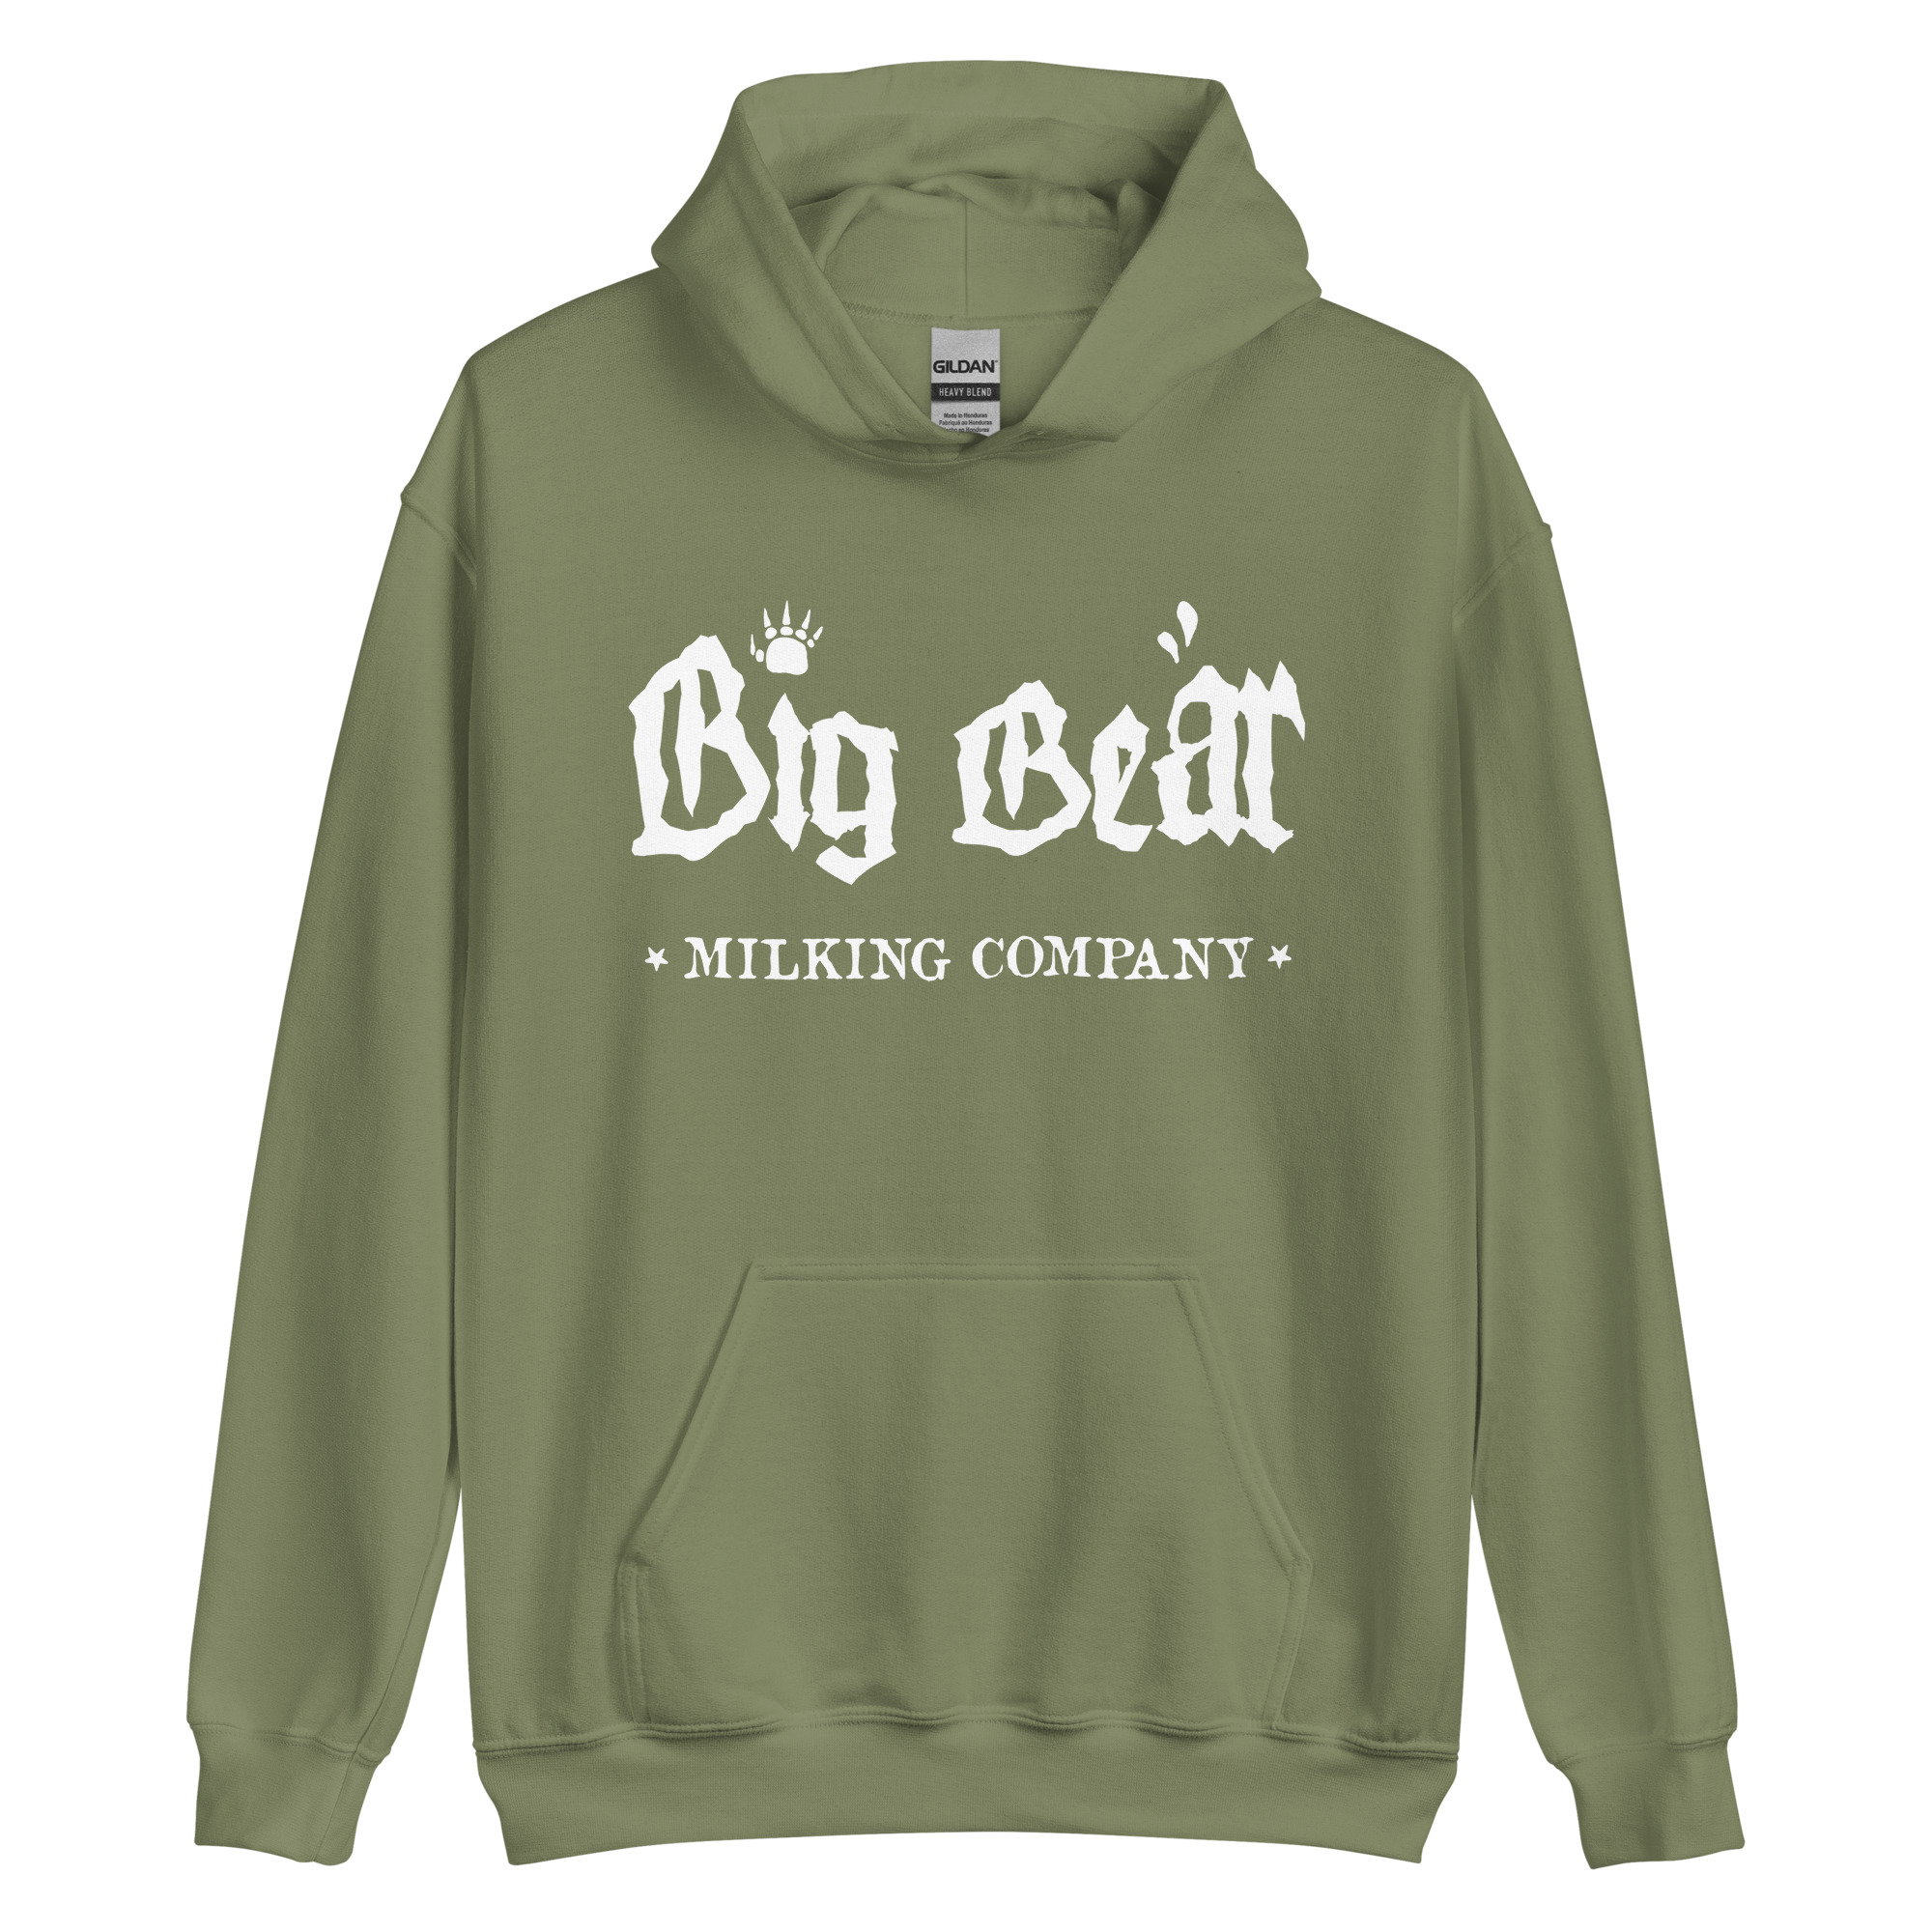 Featured image for “Big Bear Milking Co. - Unisex Hoodie”